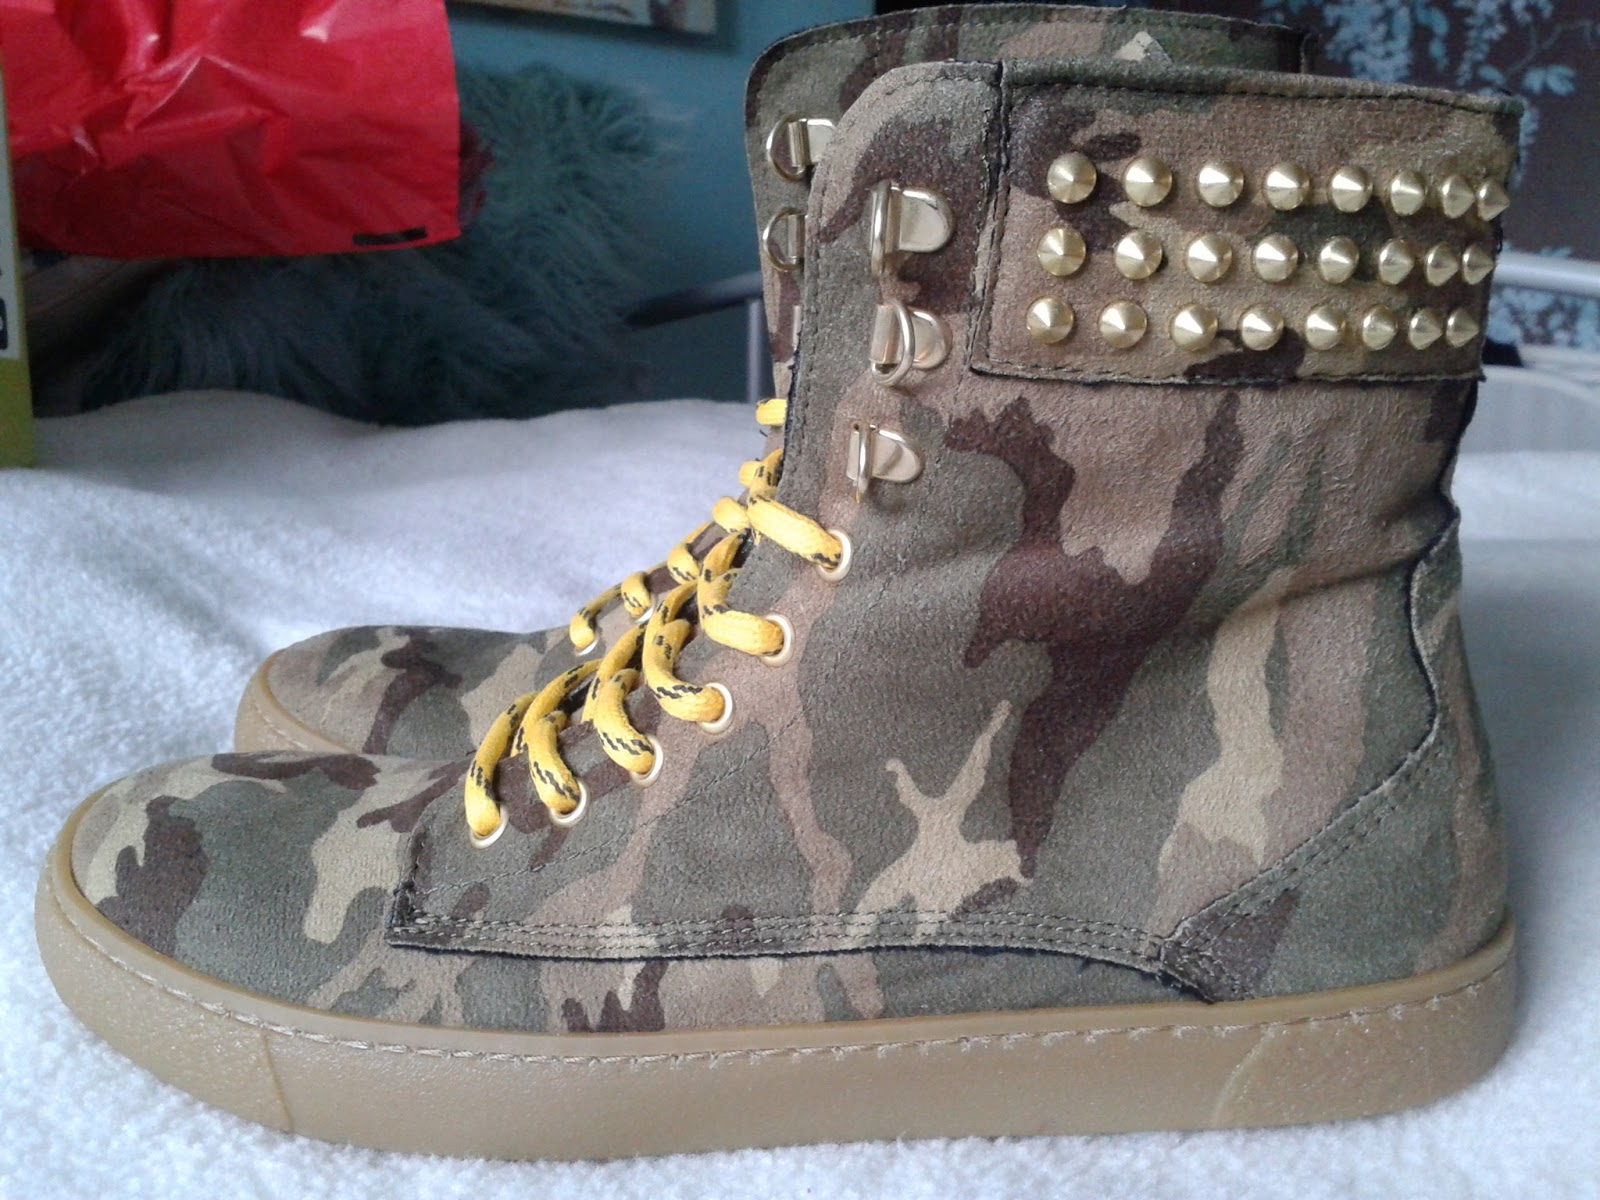 Bits and Beauty Bobs: River Island SALE Camo/Studded Army Boots